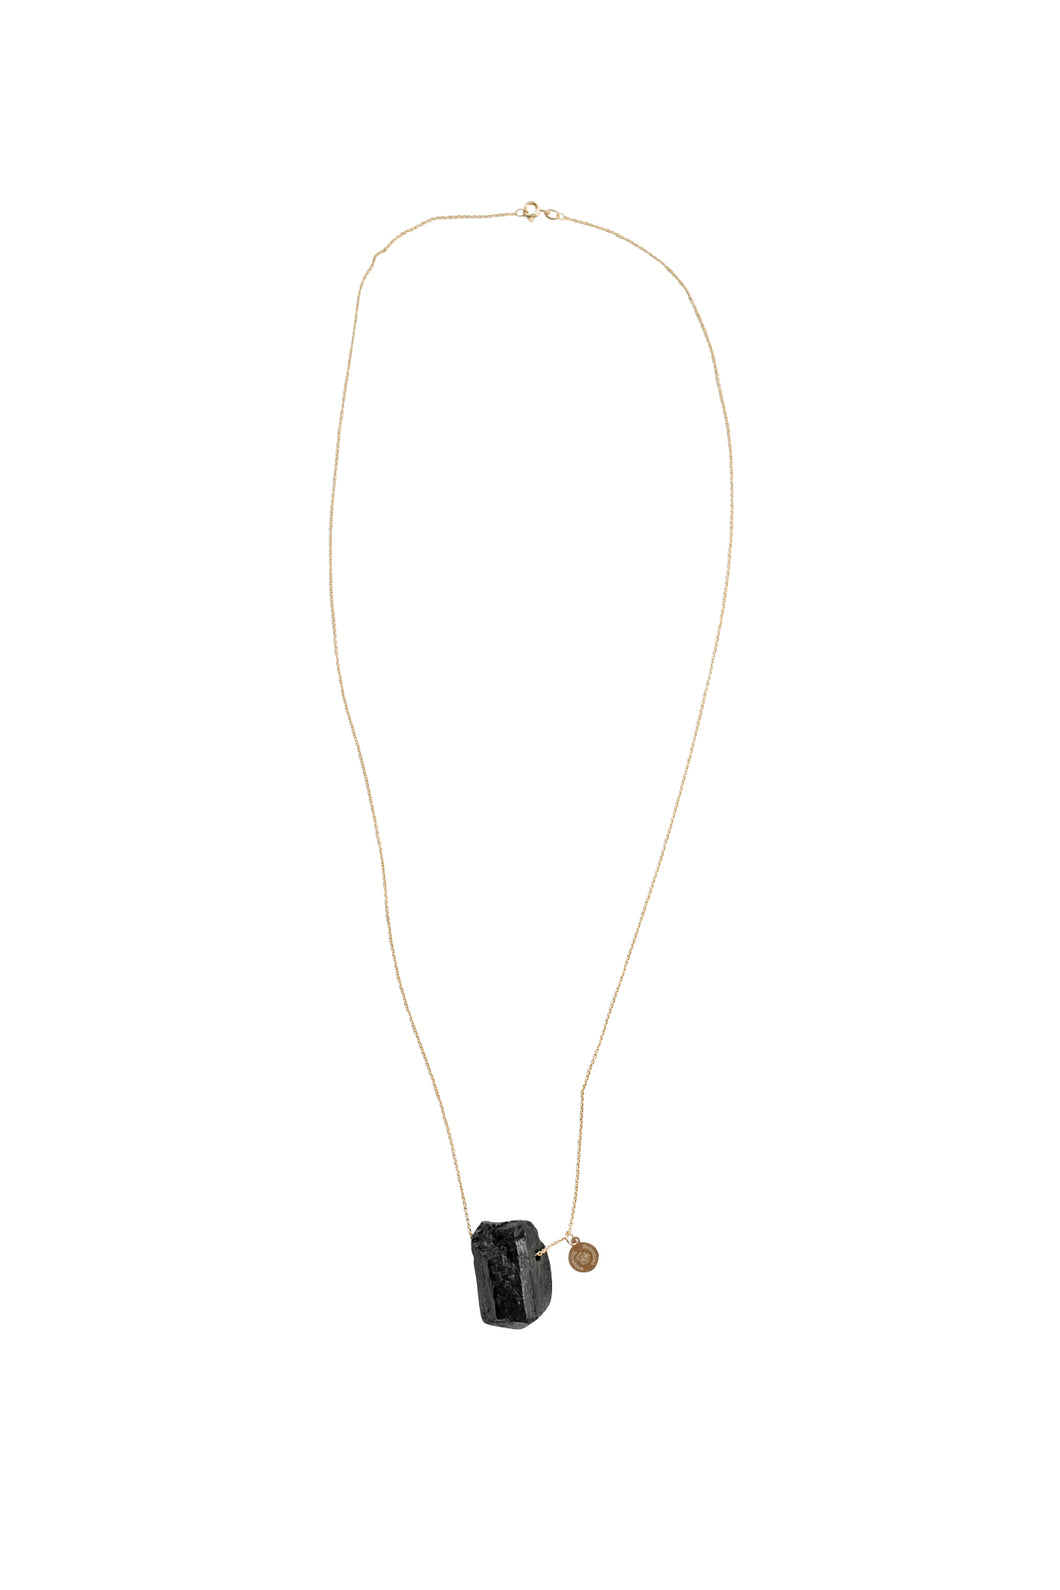 Black tourmaline necklace with 80 cm long chain. Details in 18k gold plated sterling silver.